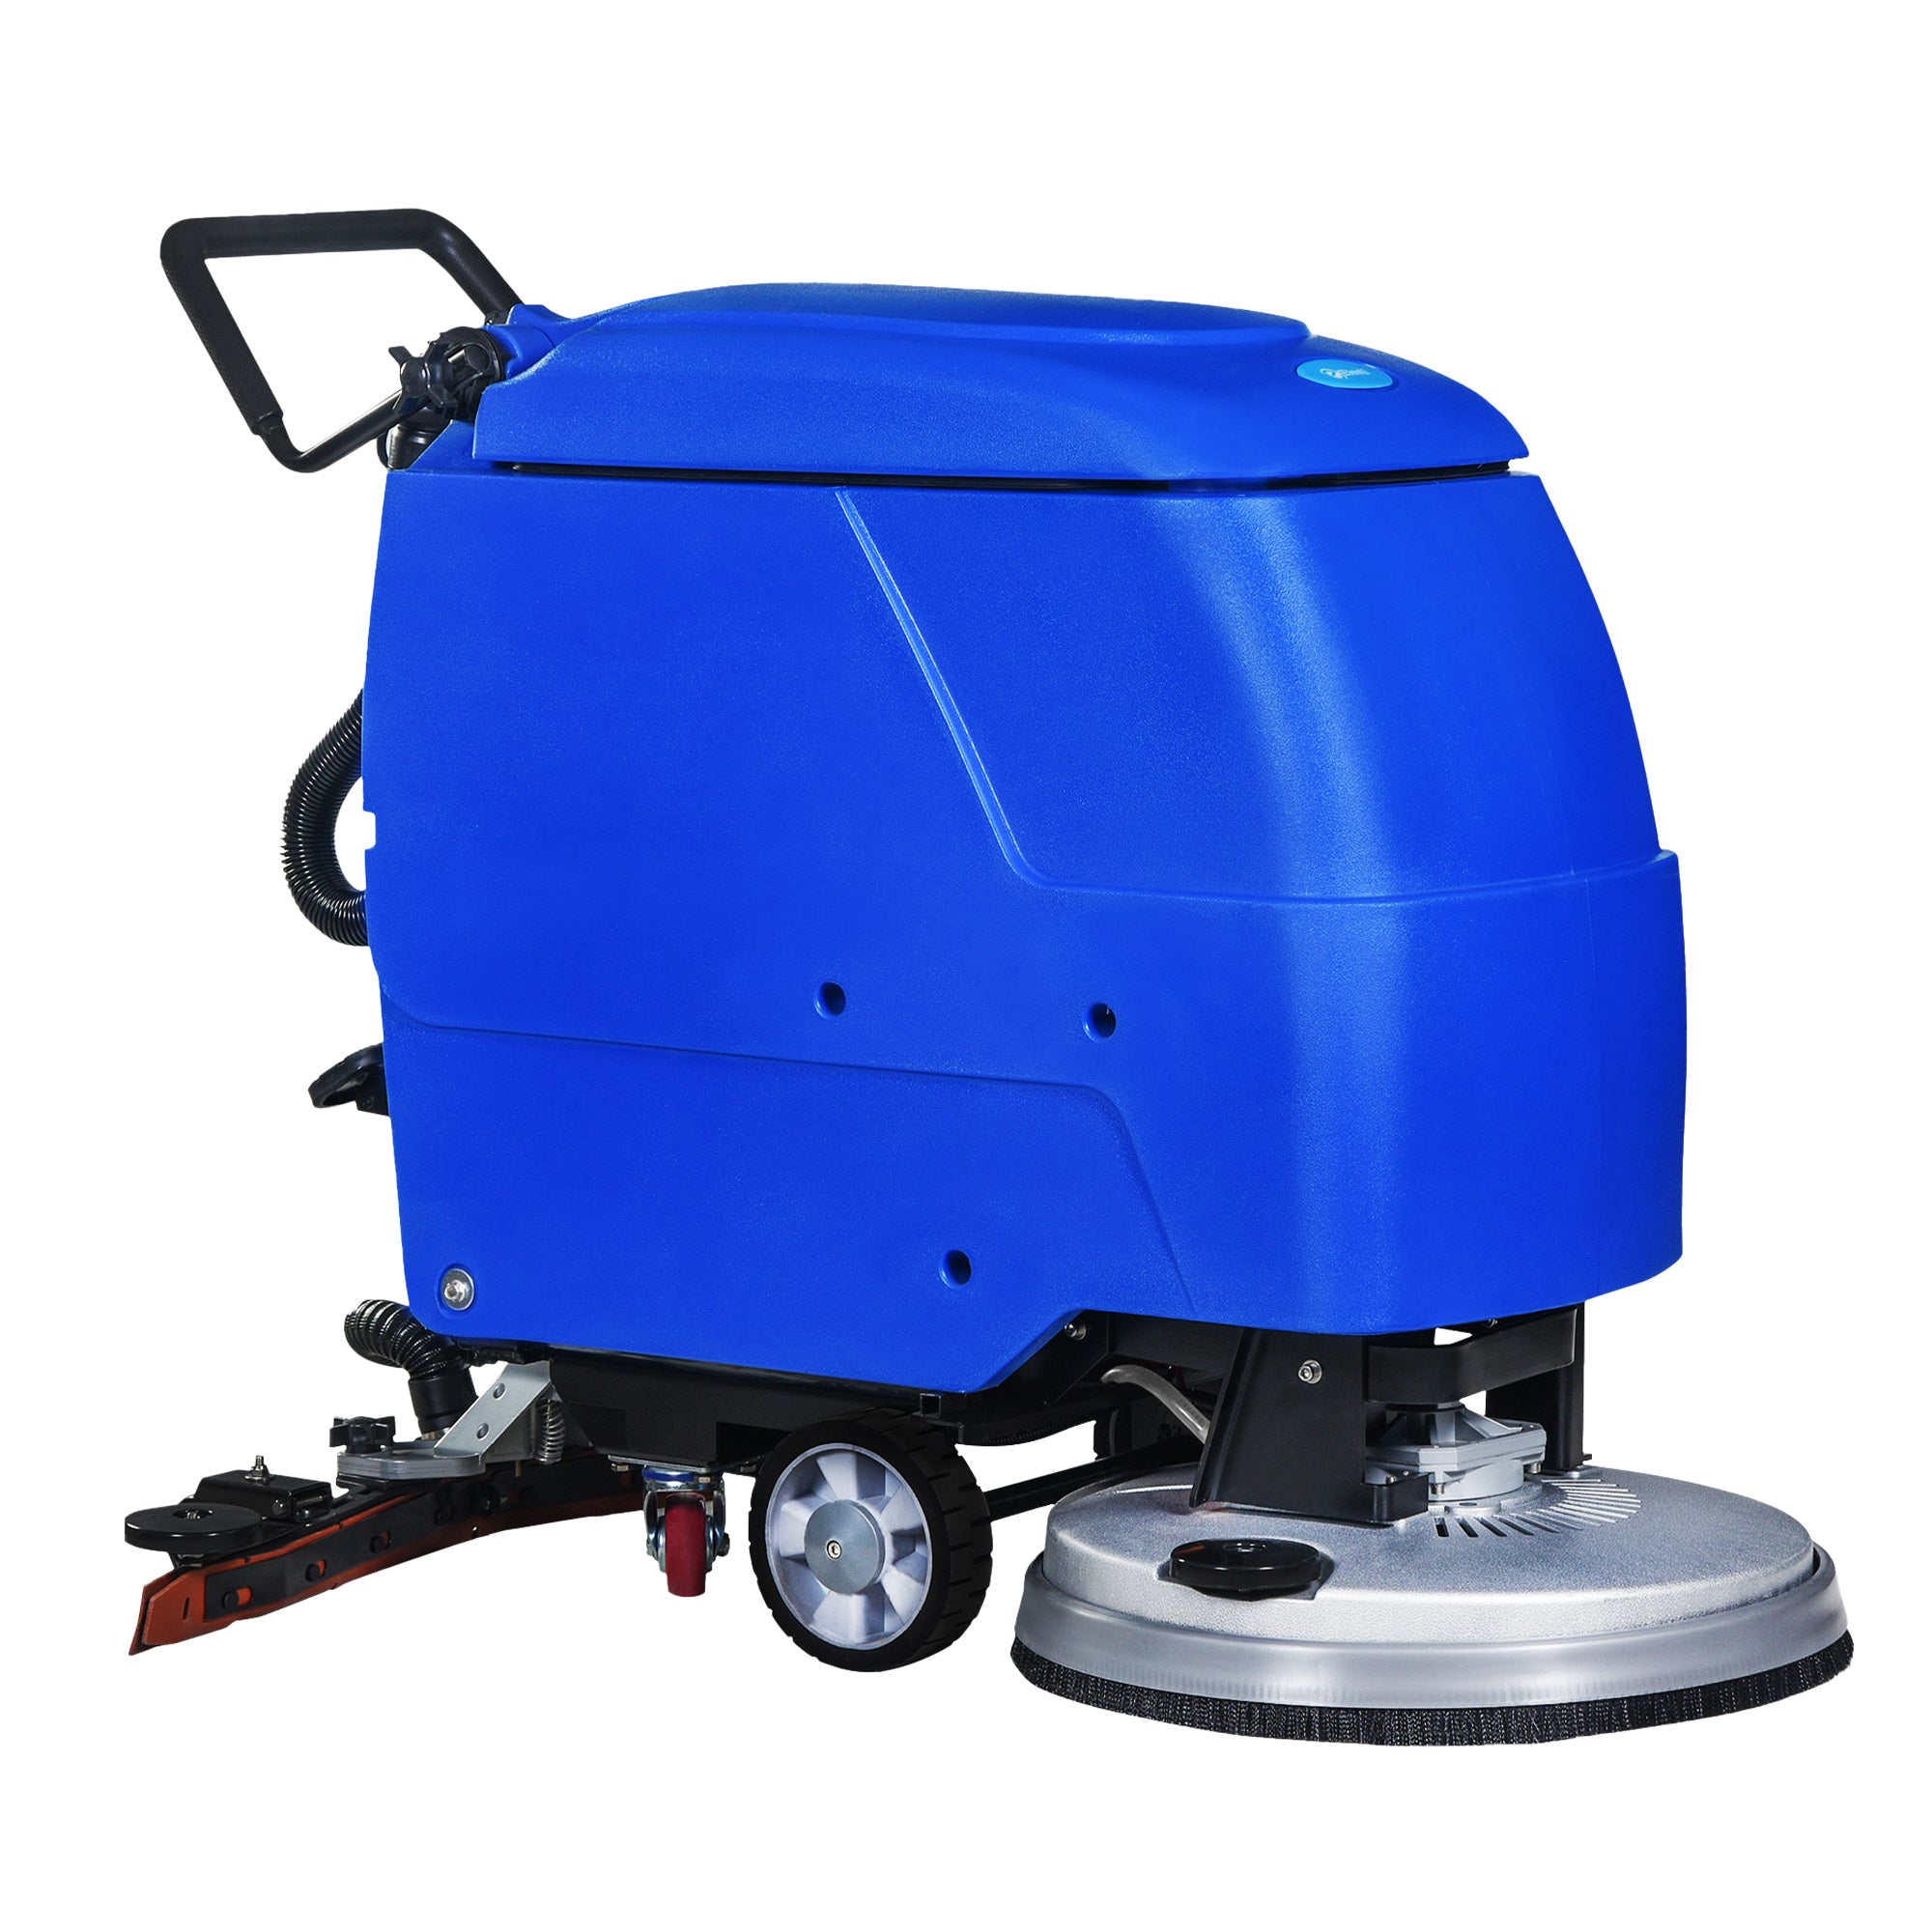 Walk-Behind Floor Scrubber with 20.8" Cleaning Path and 2 x 100Amh Batteries for Commercial, Home